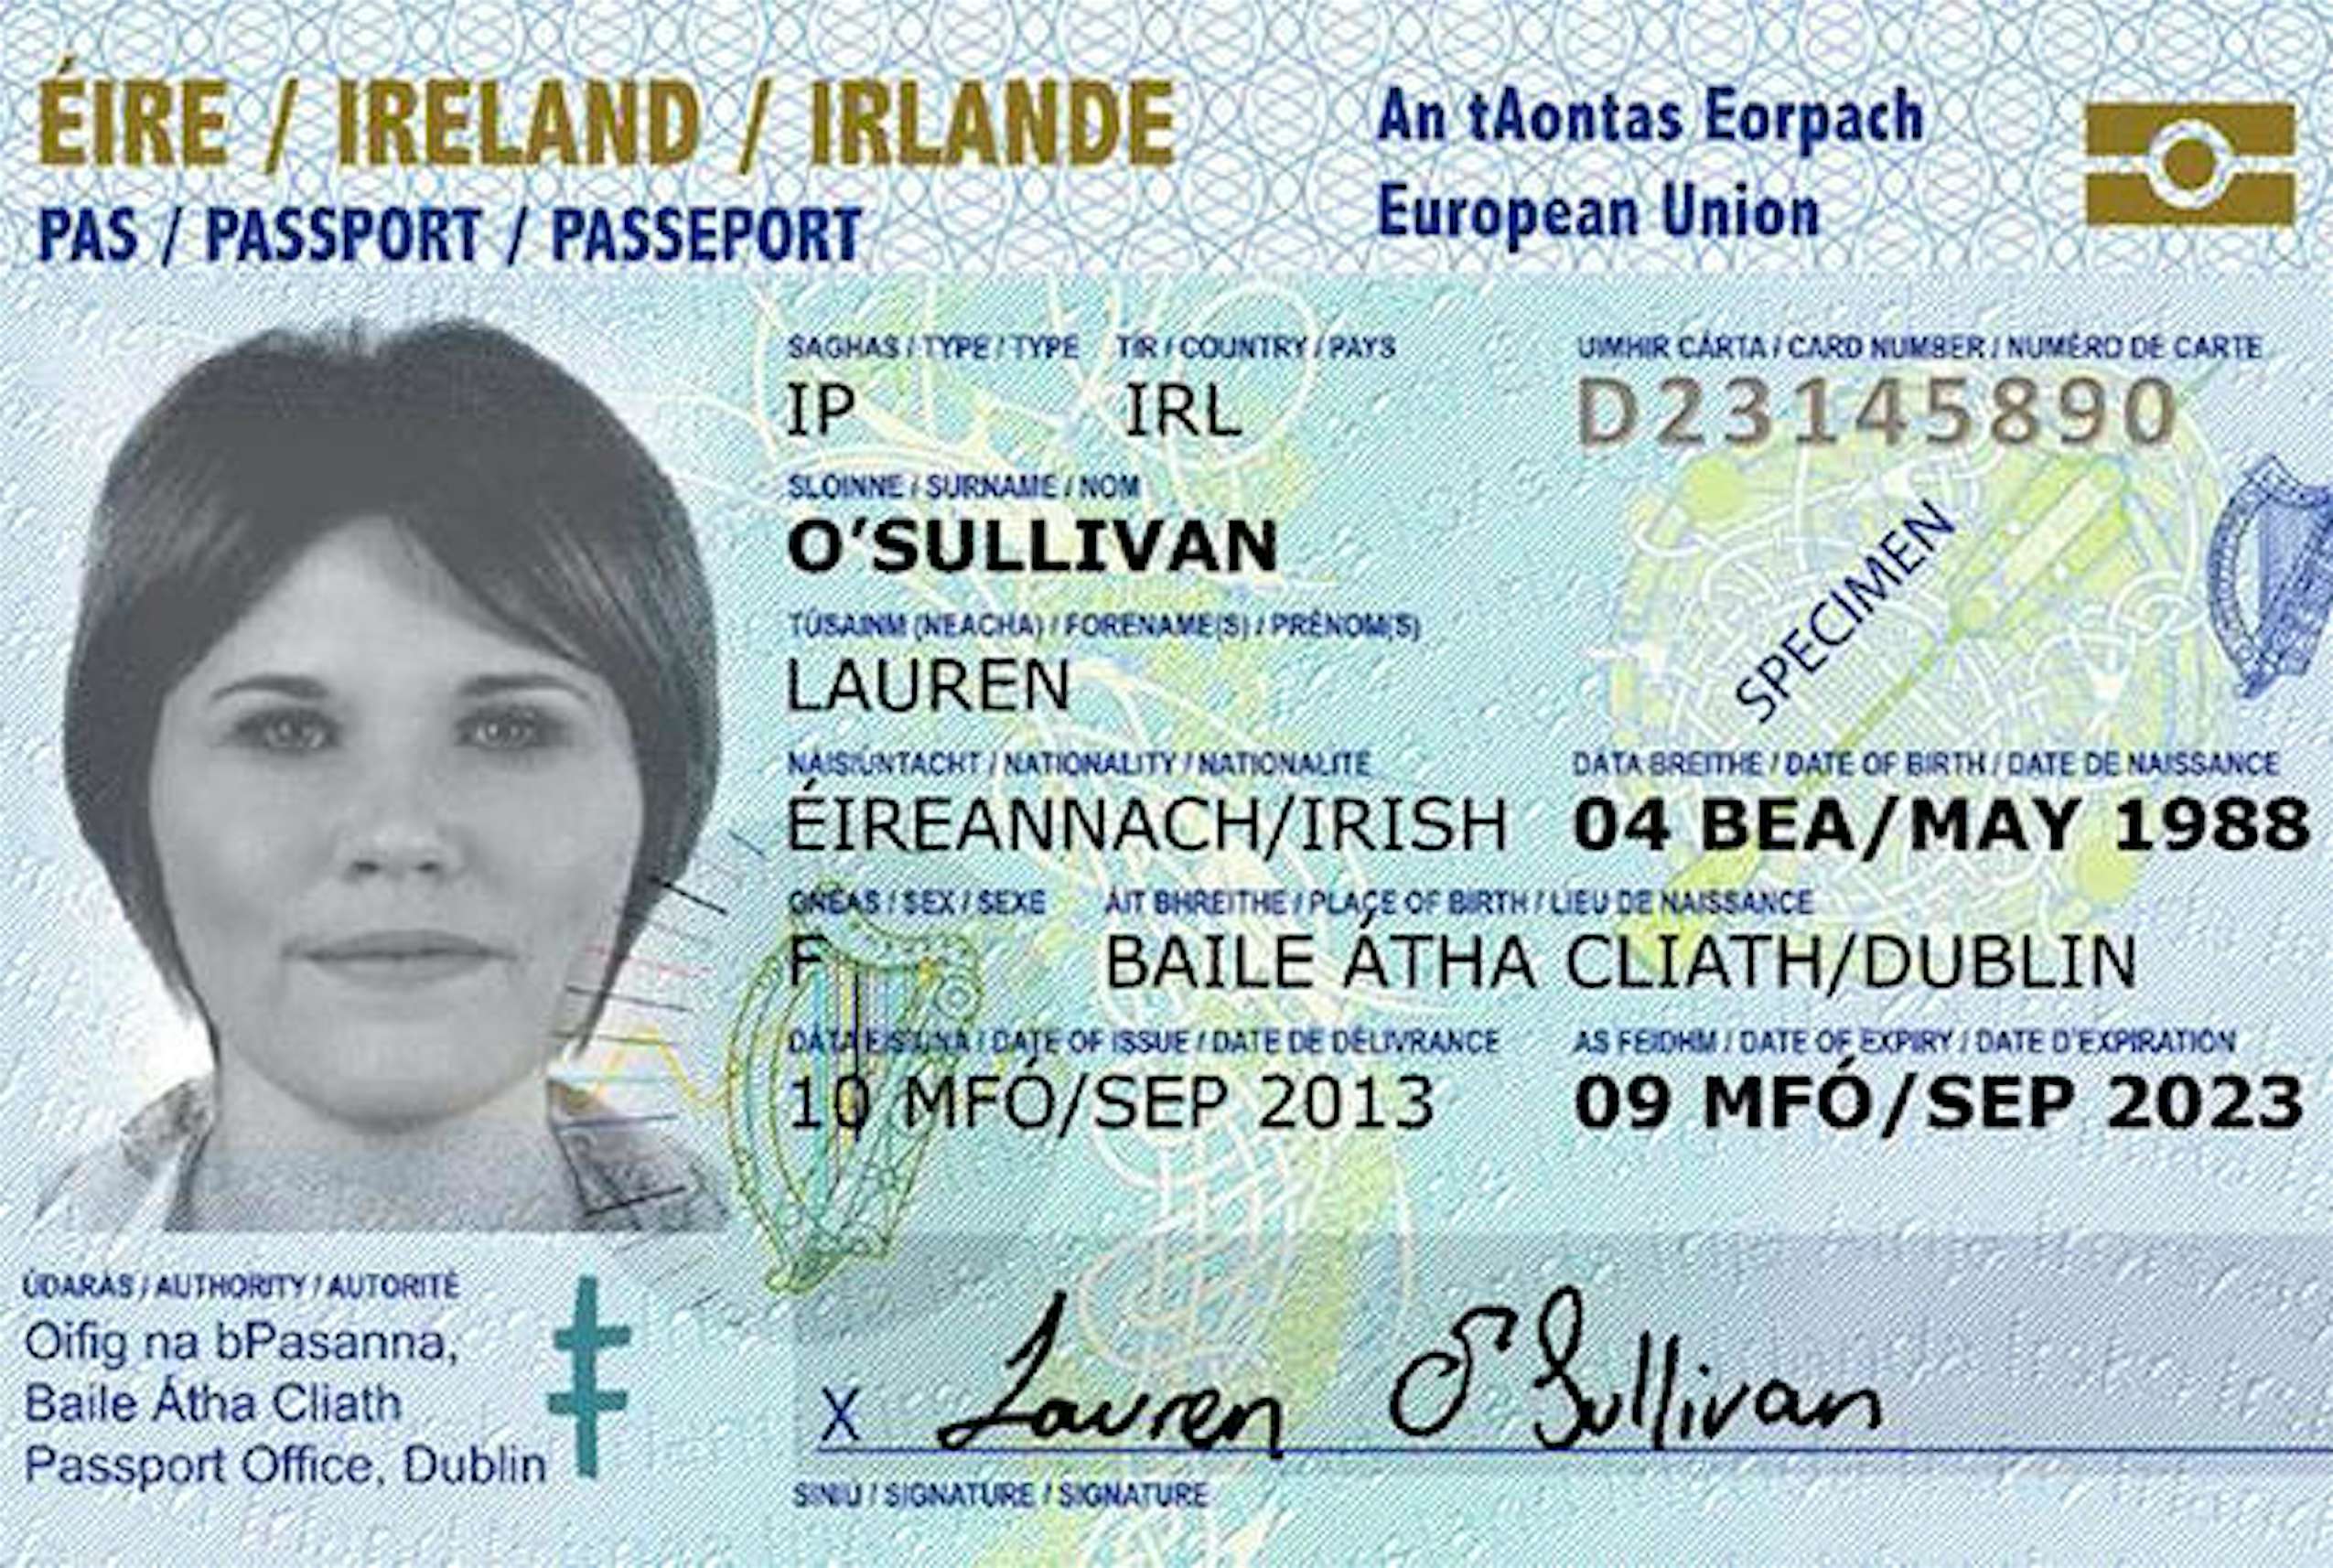 Ireland's new passport card approved for EU travel Lonely